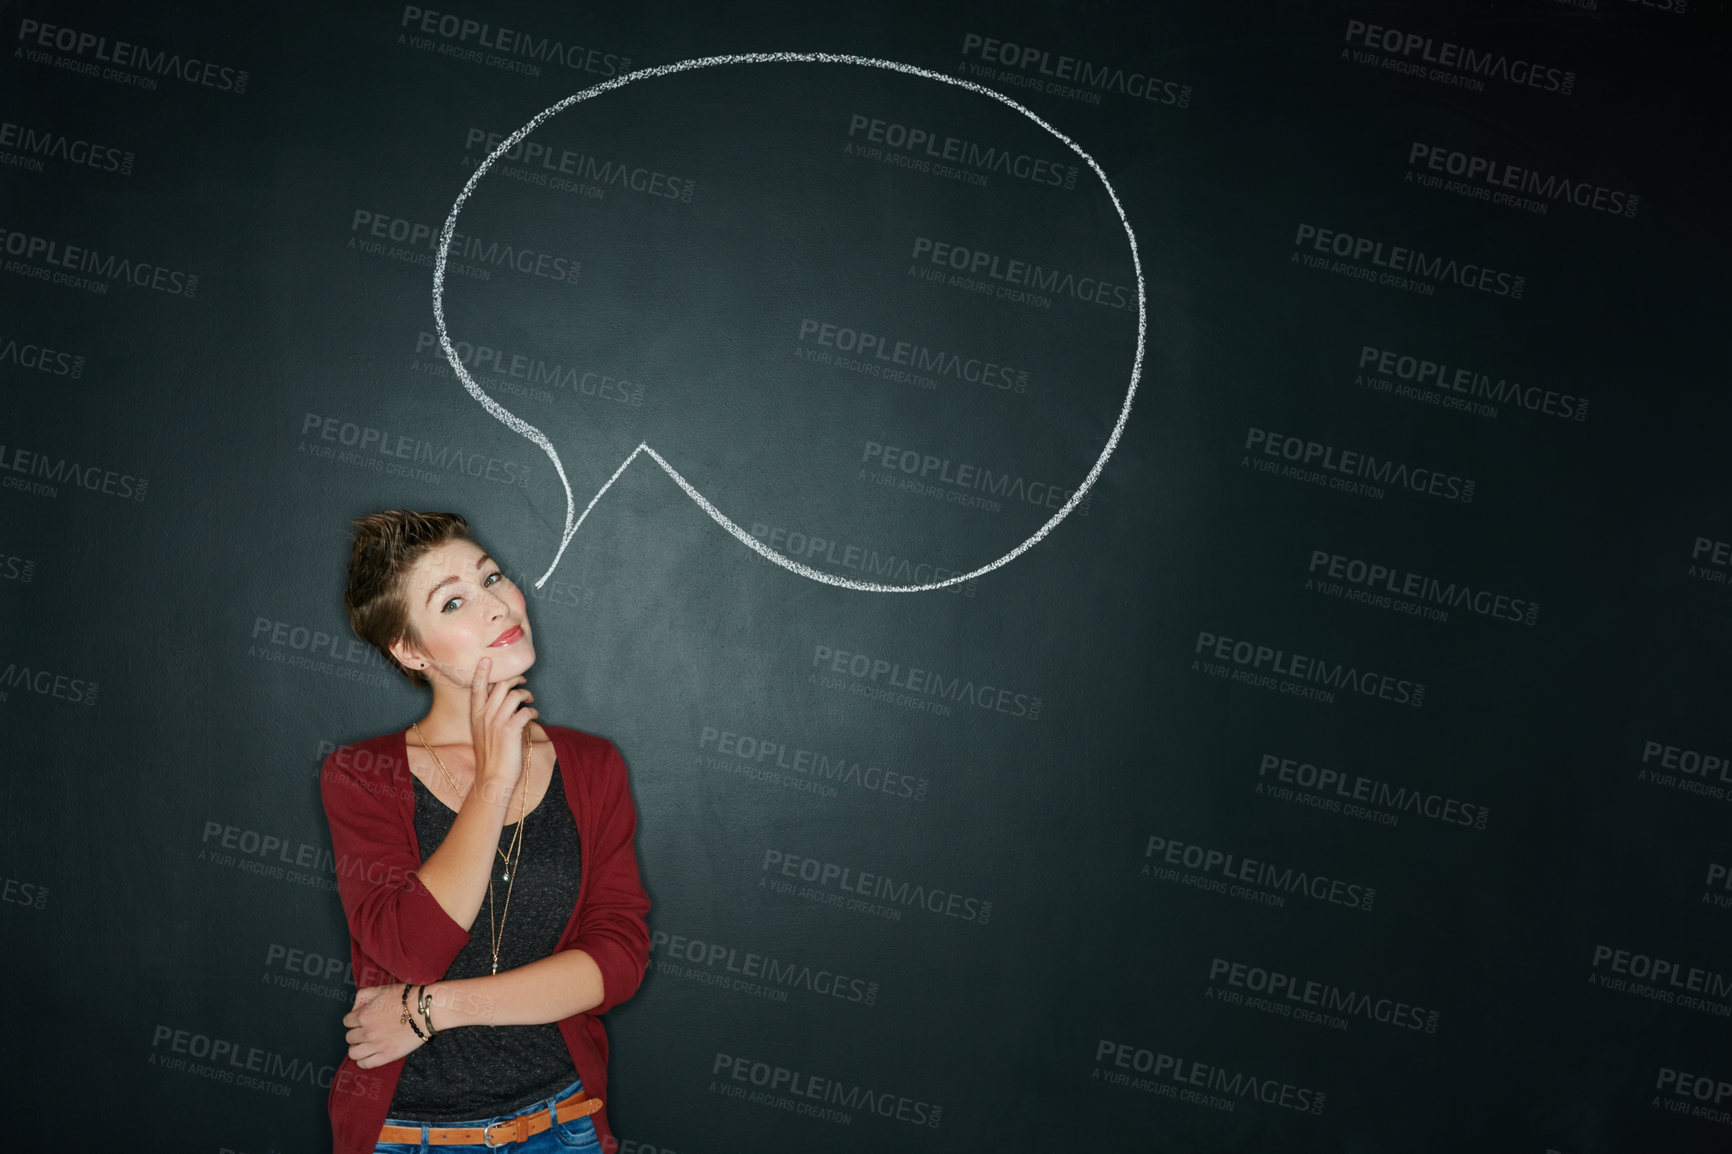 Buy stock photo Studio shot of a young woman posing with a chalk illustration of a speech bubble against a dark background